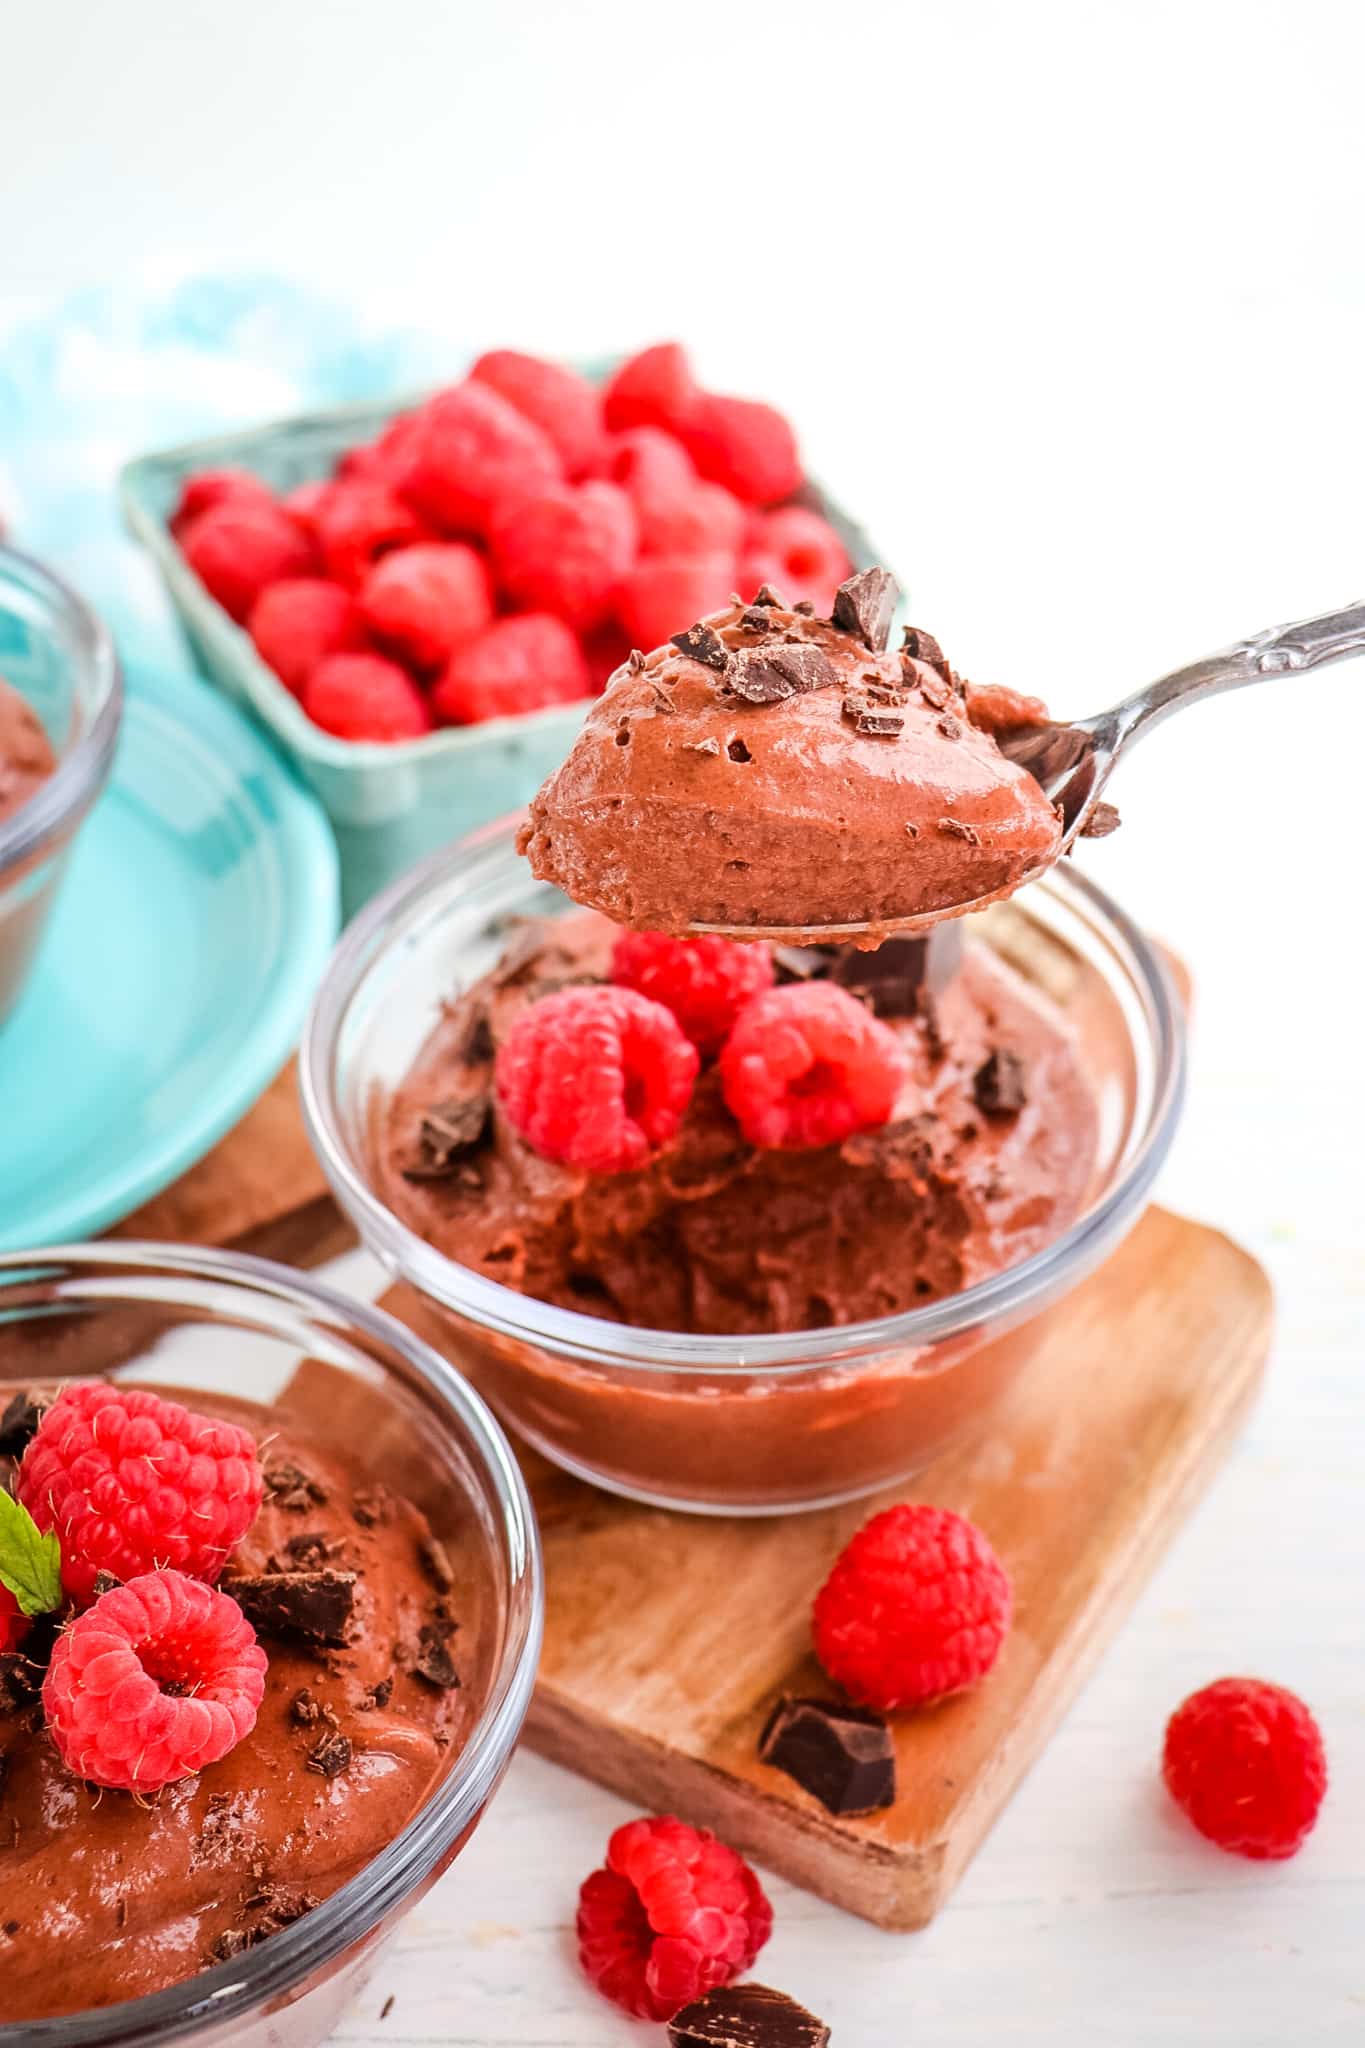 Spoon taking bite out of chocolate protein pudding, topped with chocolate chunks and fresh raspberries.